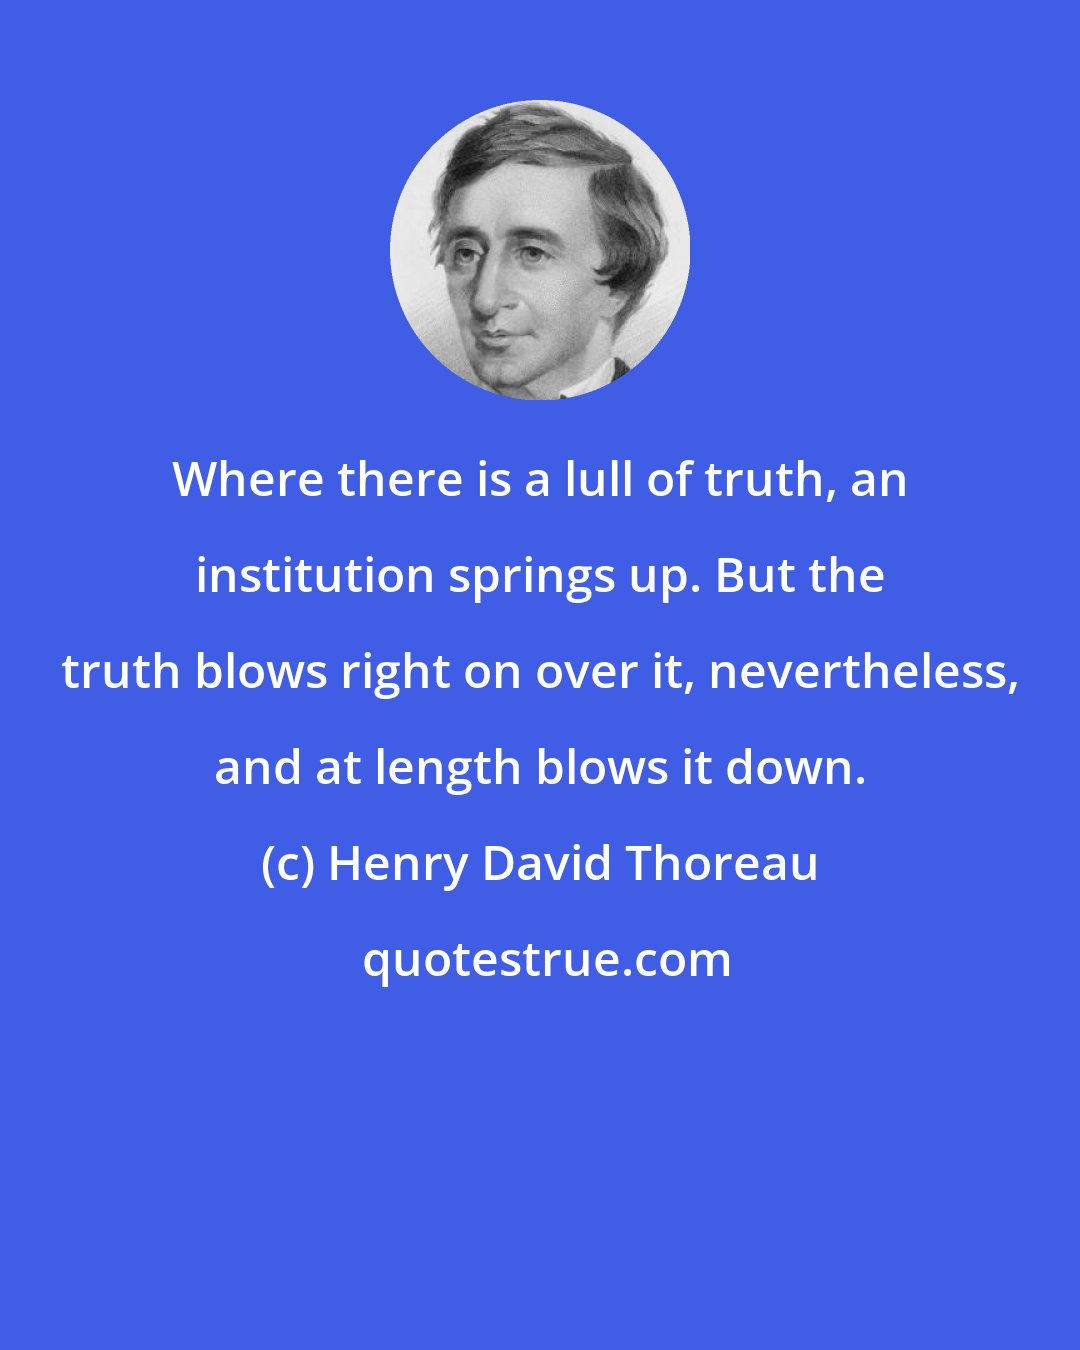 Henry David Thoreau: Where there is a lull of truth, an institution springs up. But the truth blows right on over it, nevertheless, and at length blows it down.